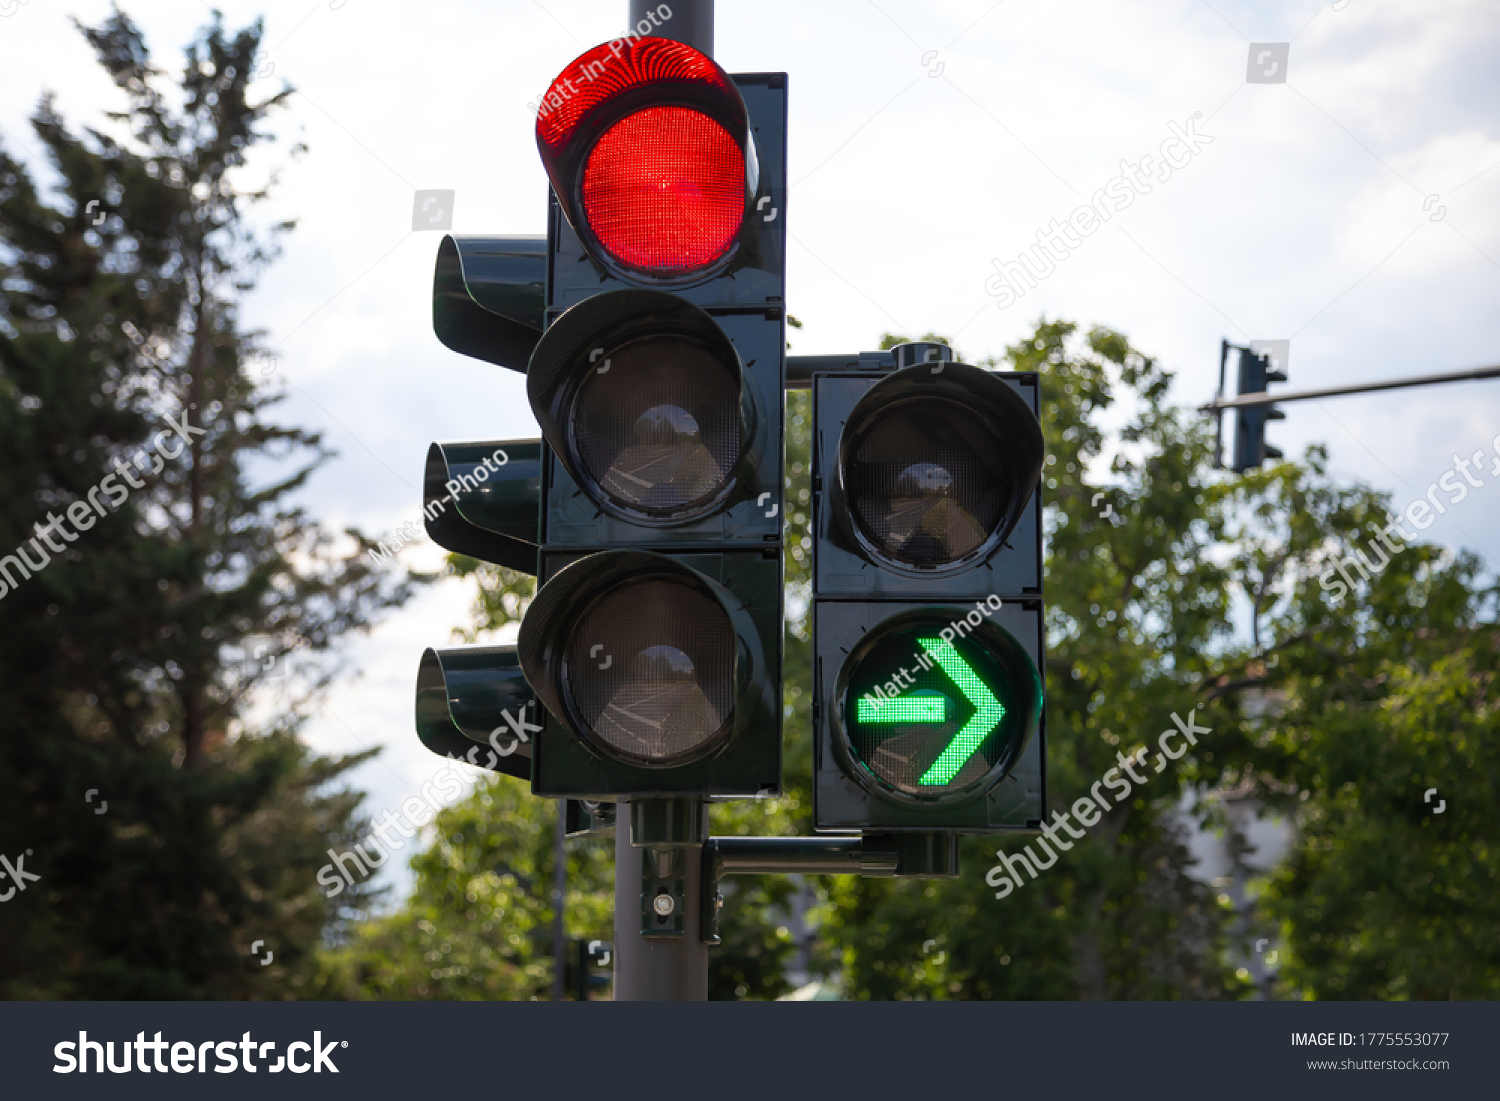 red german traffic light with green arrow light up allow by law to turn right #1775553077